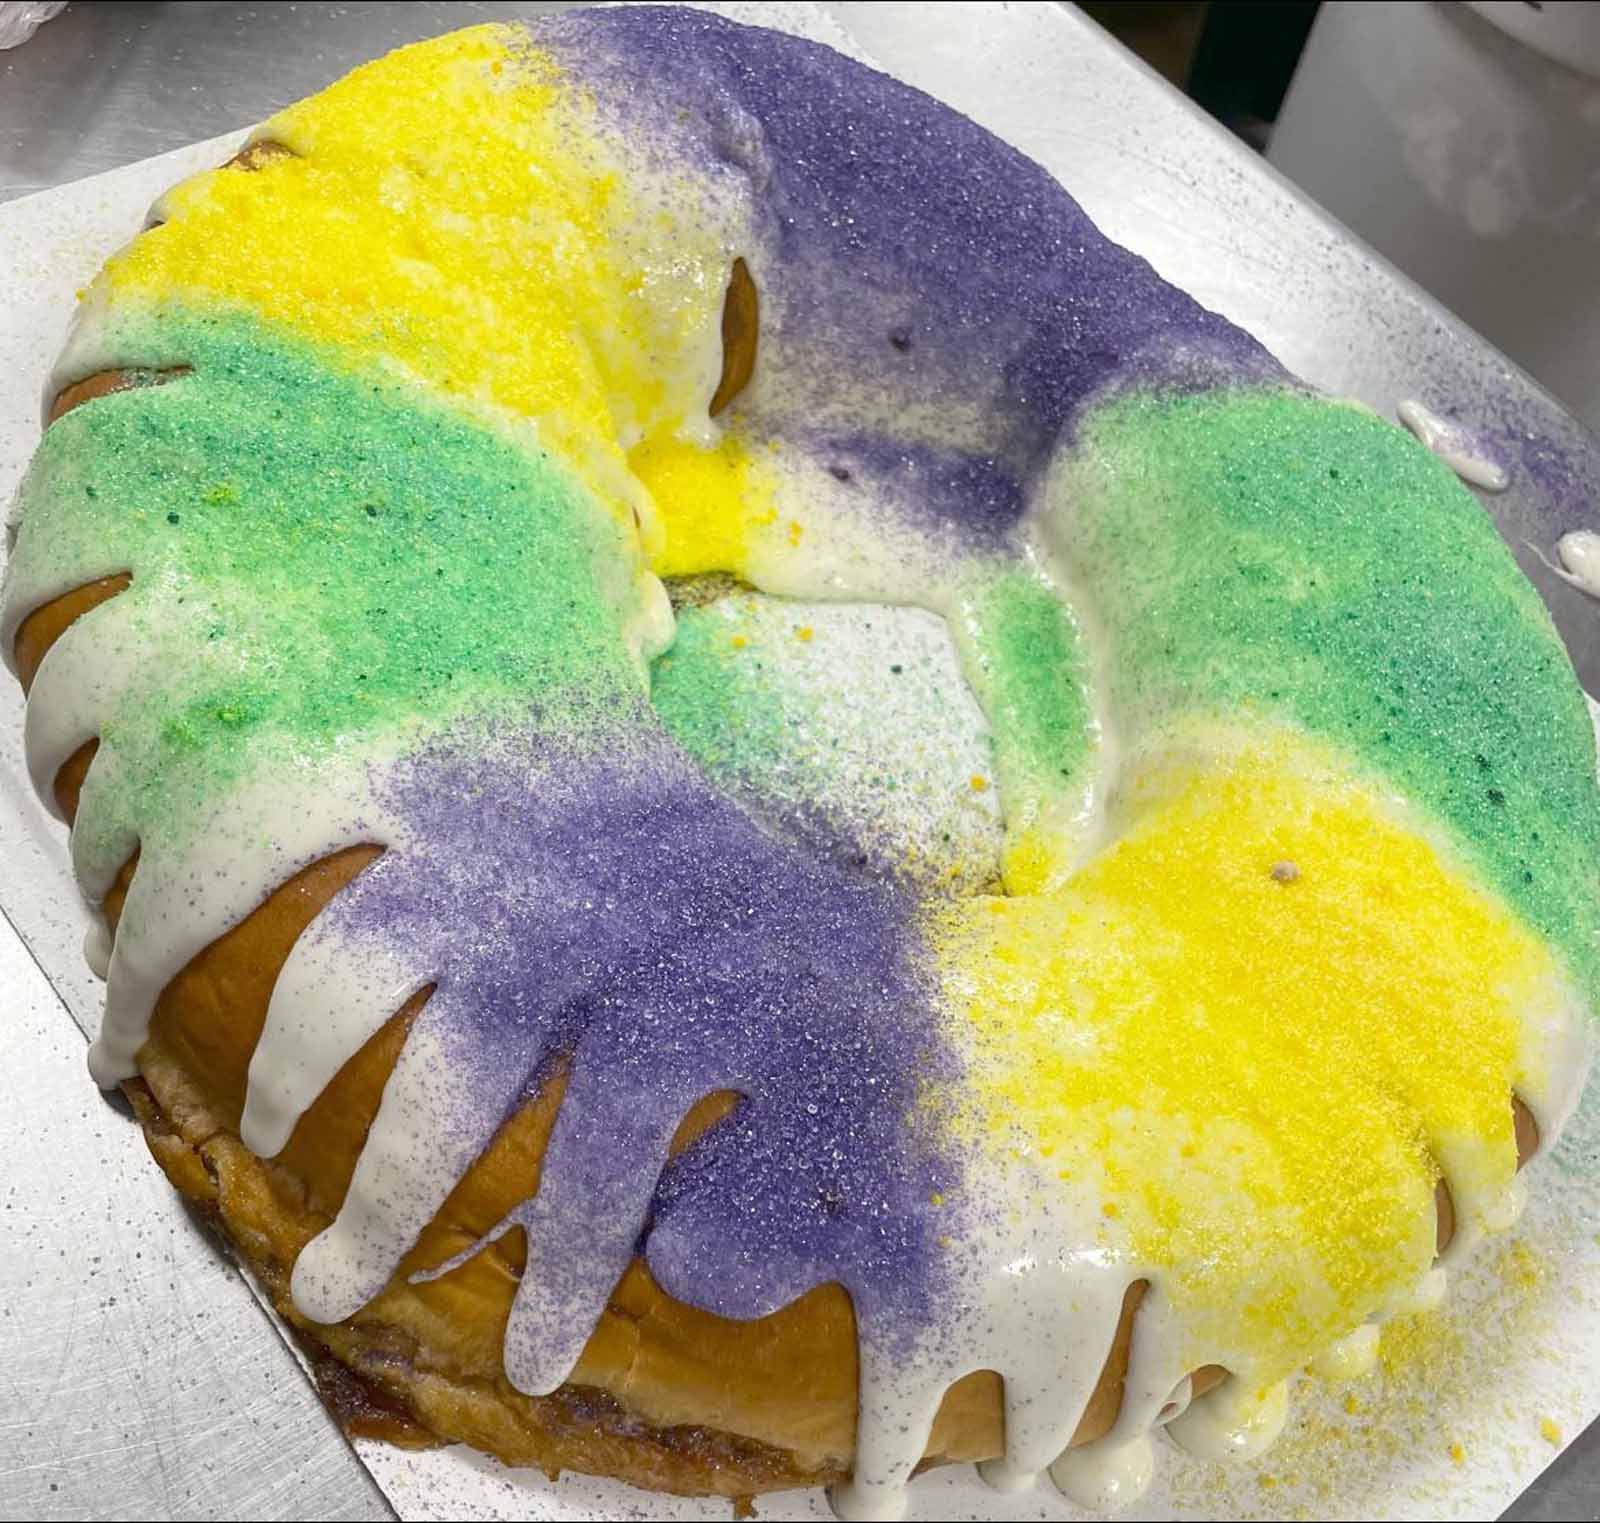 Local Bakery Places Third In King Cake Competition